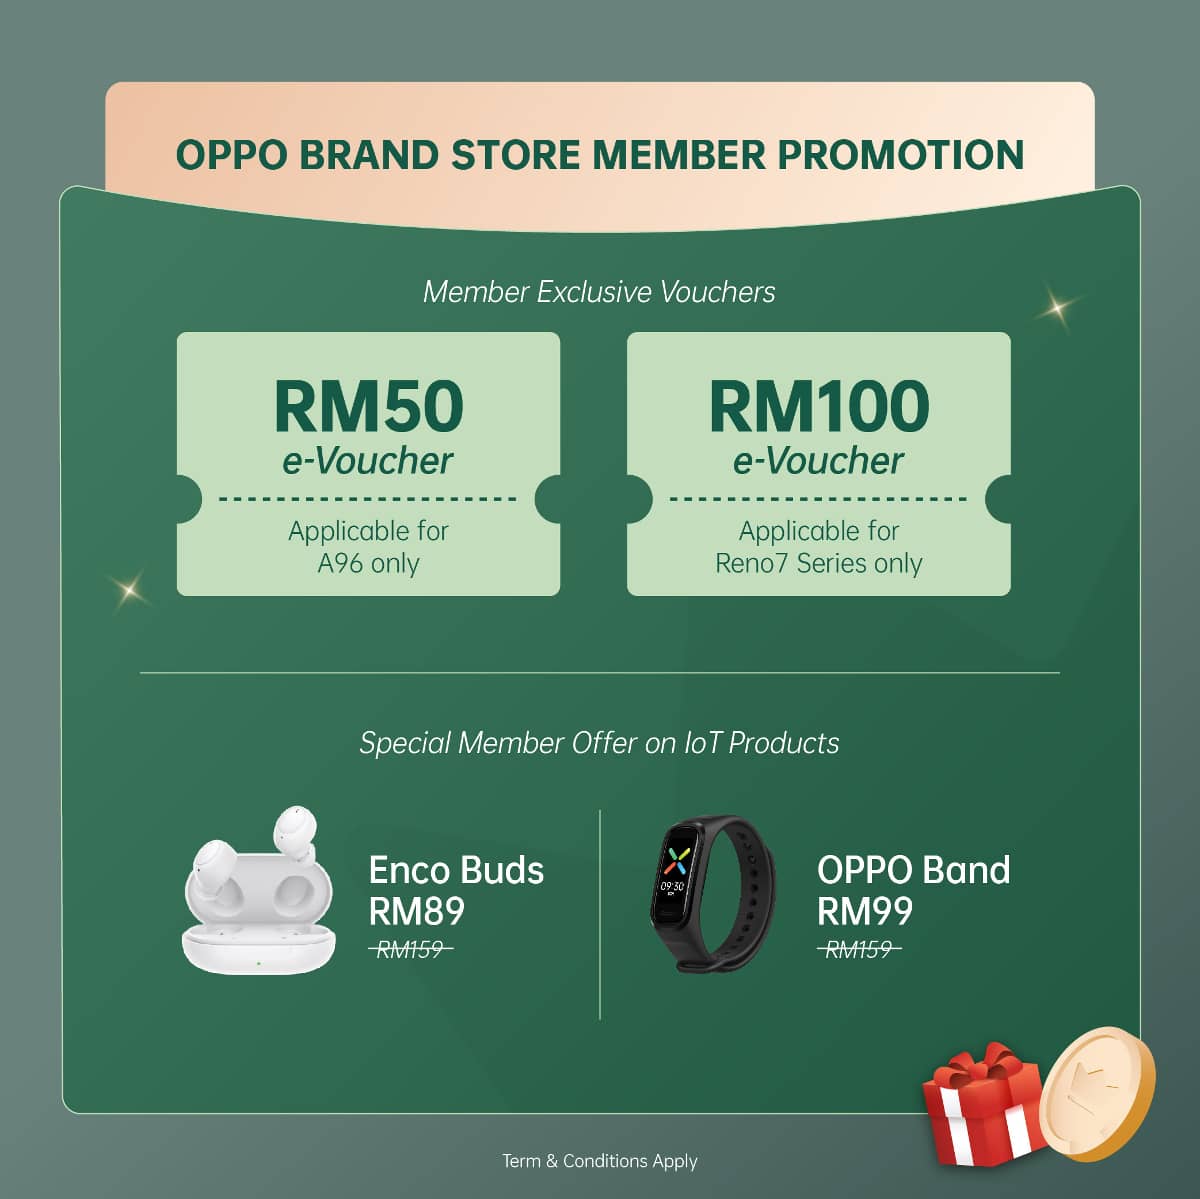 OPPO Celebrates 2 Million My OPPO Members with Giveaways Worth Up to RM150,000